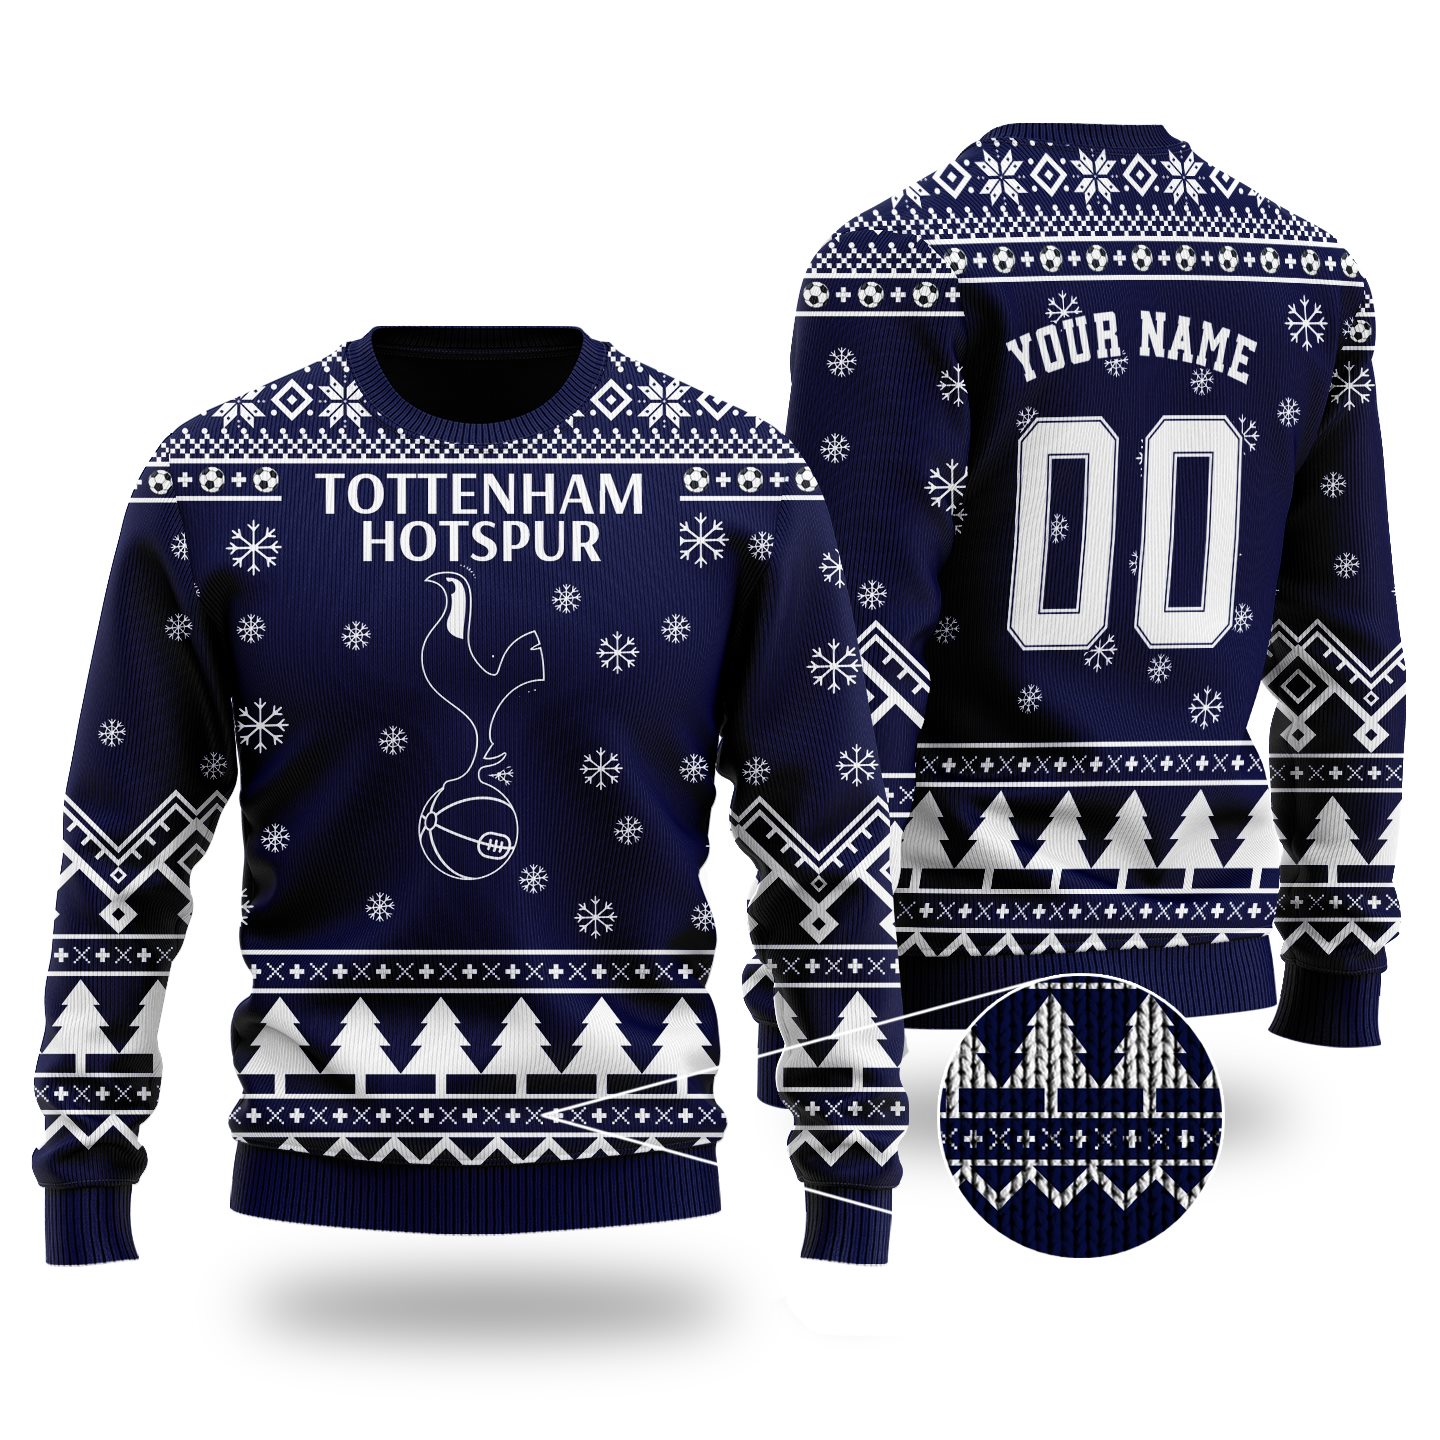 Tottenham Hotspur Frankincense All Over Print Knitted Sweater Gift